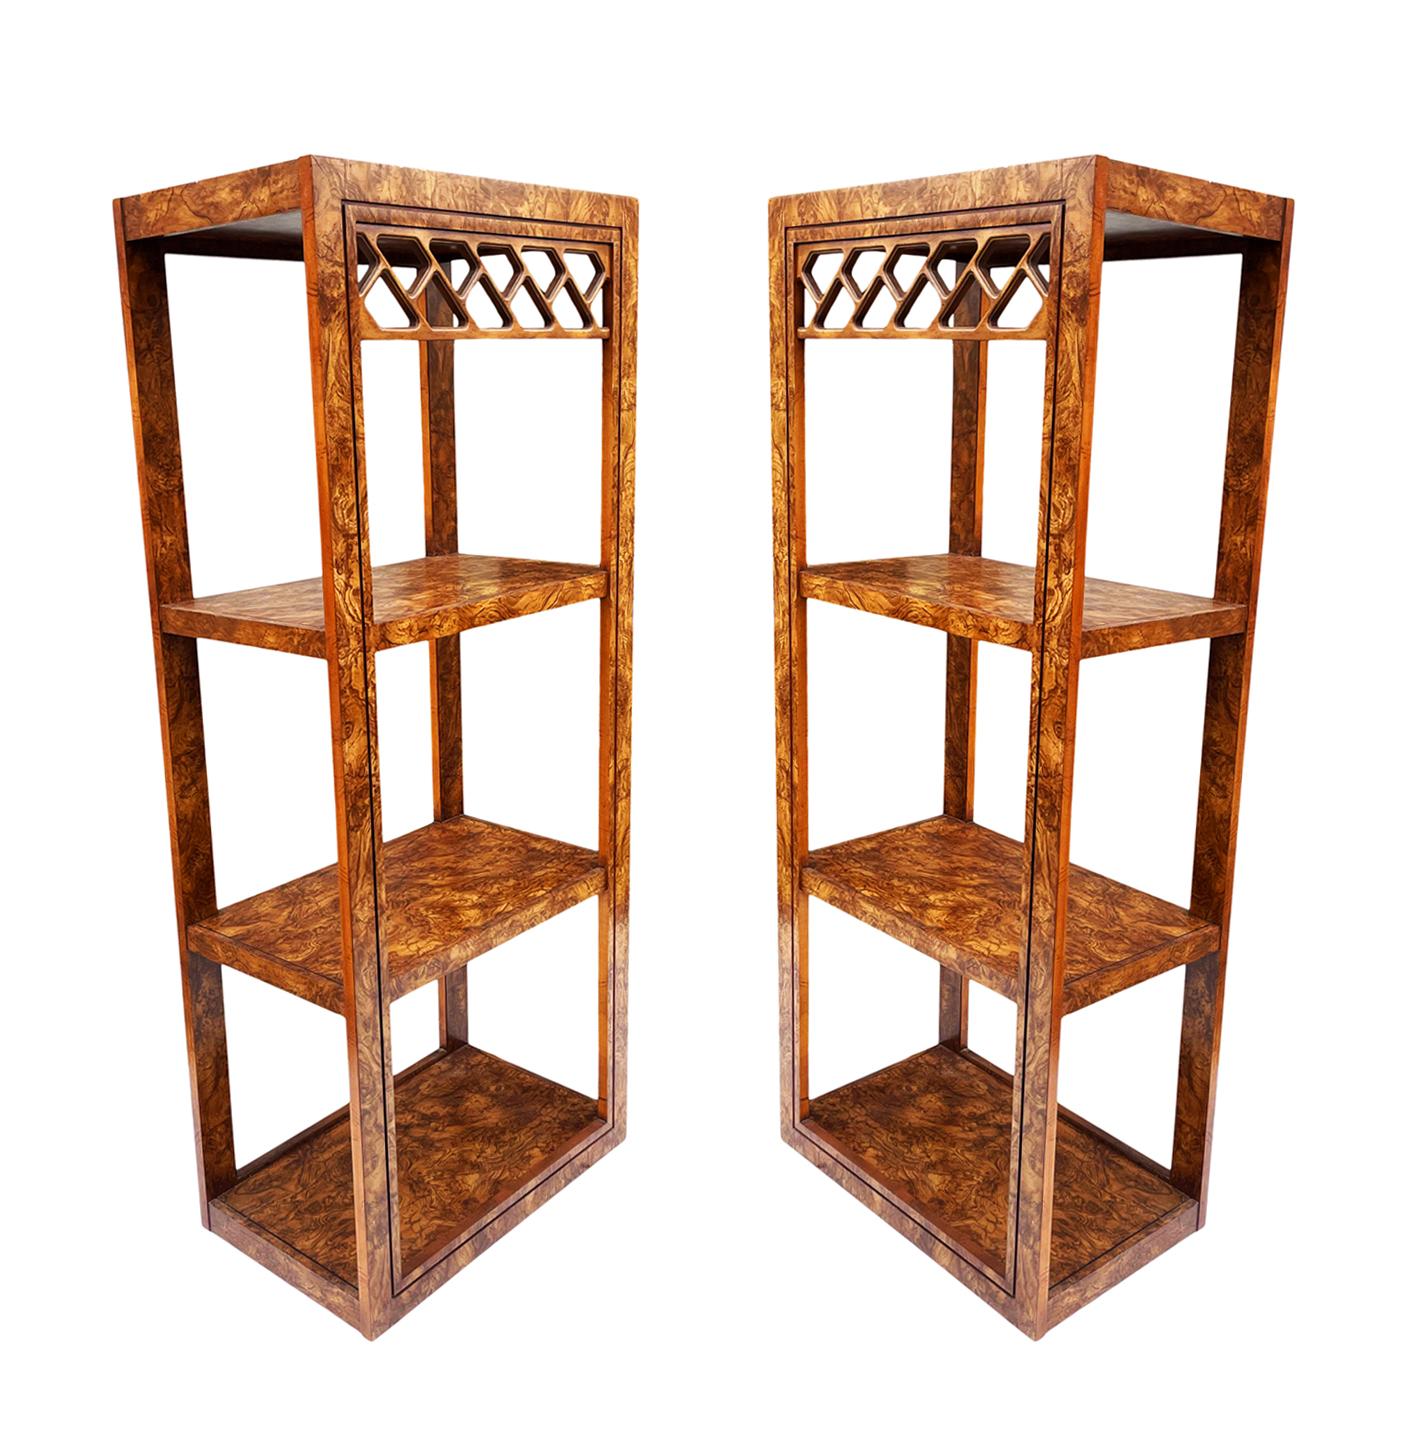 Pair of Mid Century Modern Burl Wood Etageres, Wall Unit or Book Shelves In Good Condition For Sale In Philadelphia, PA